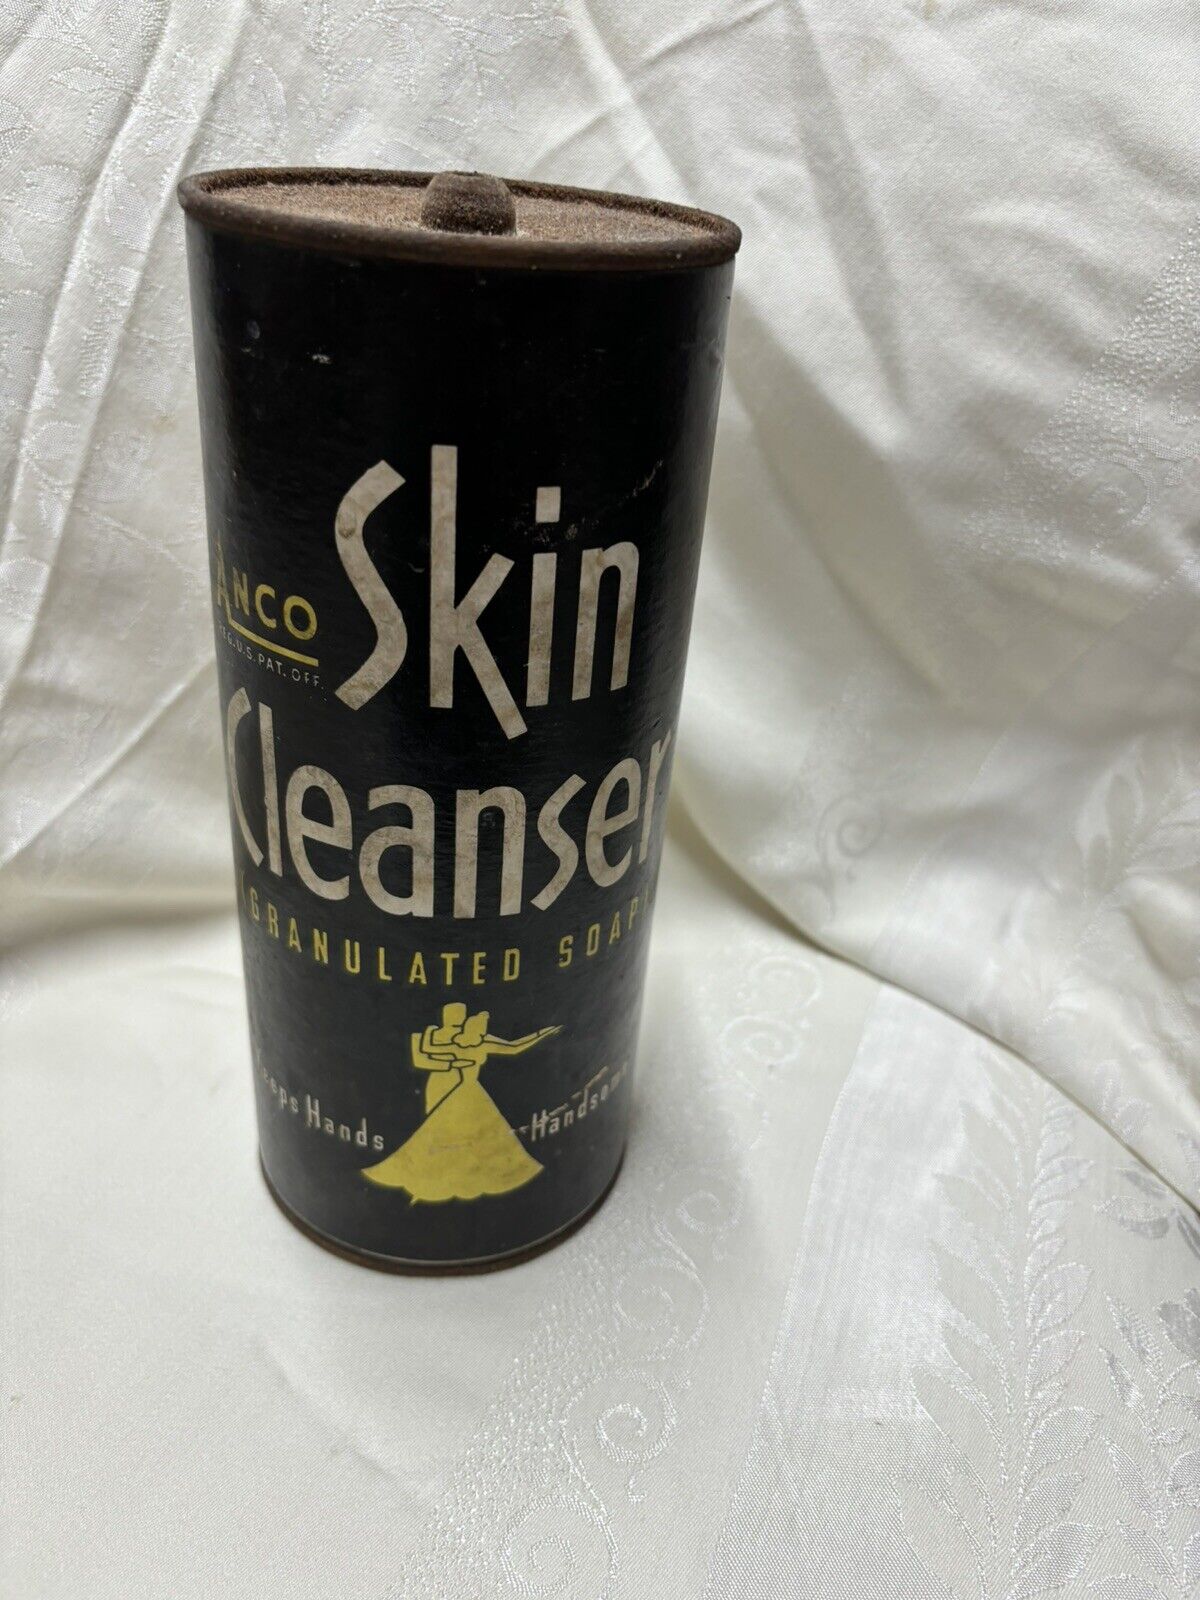 Vintage Anco Skin Cleanser Can